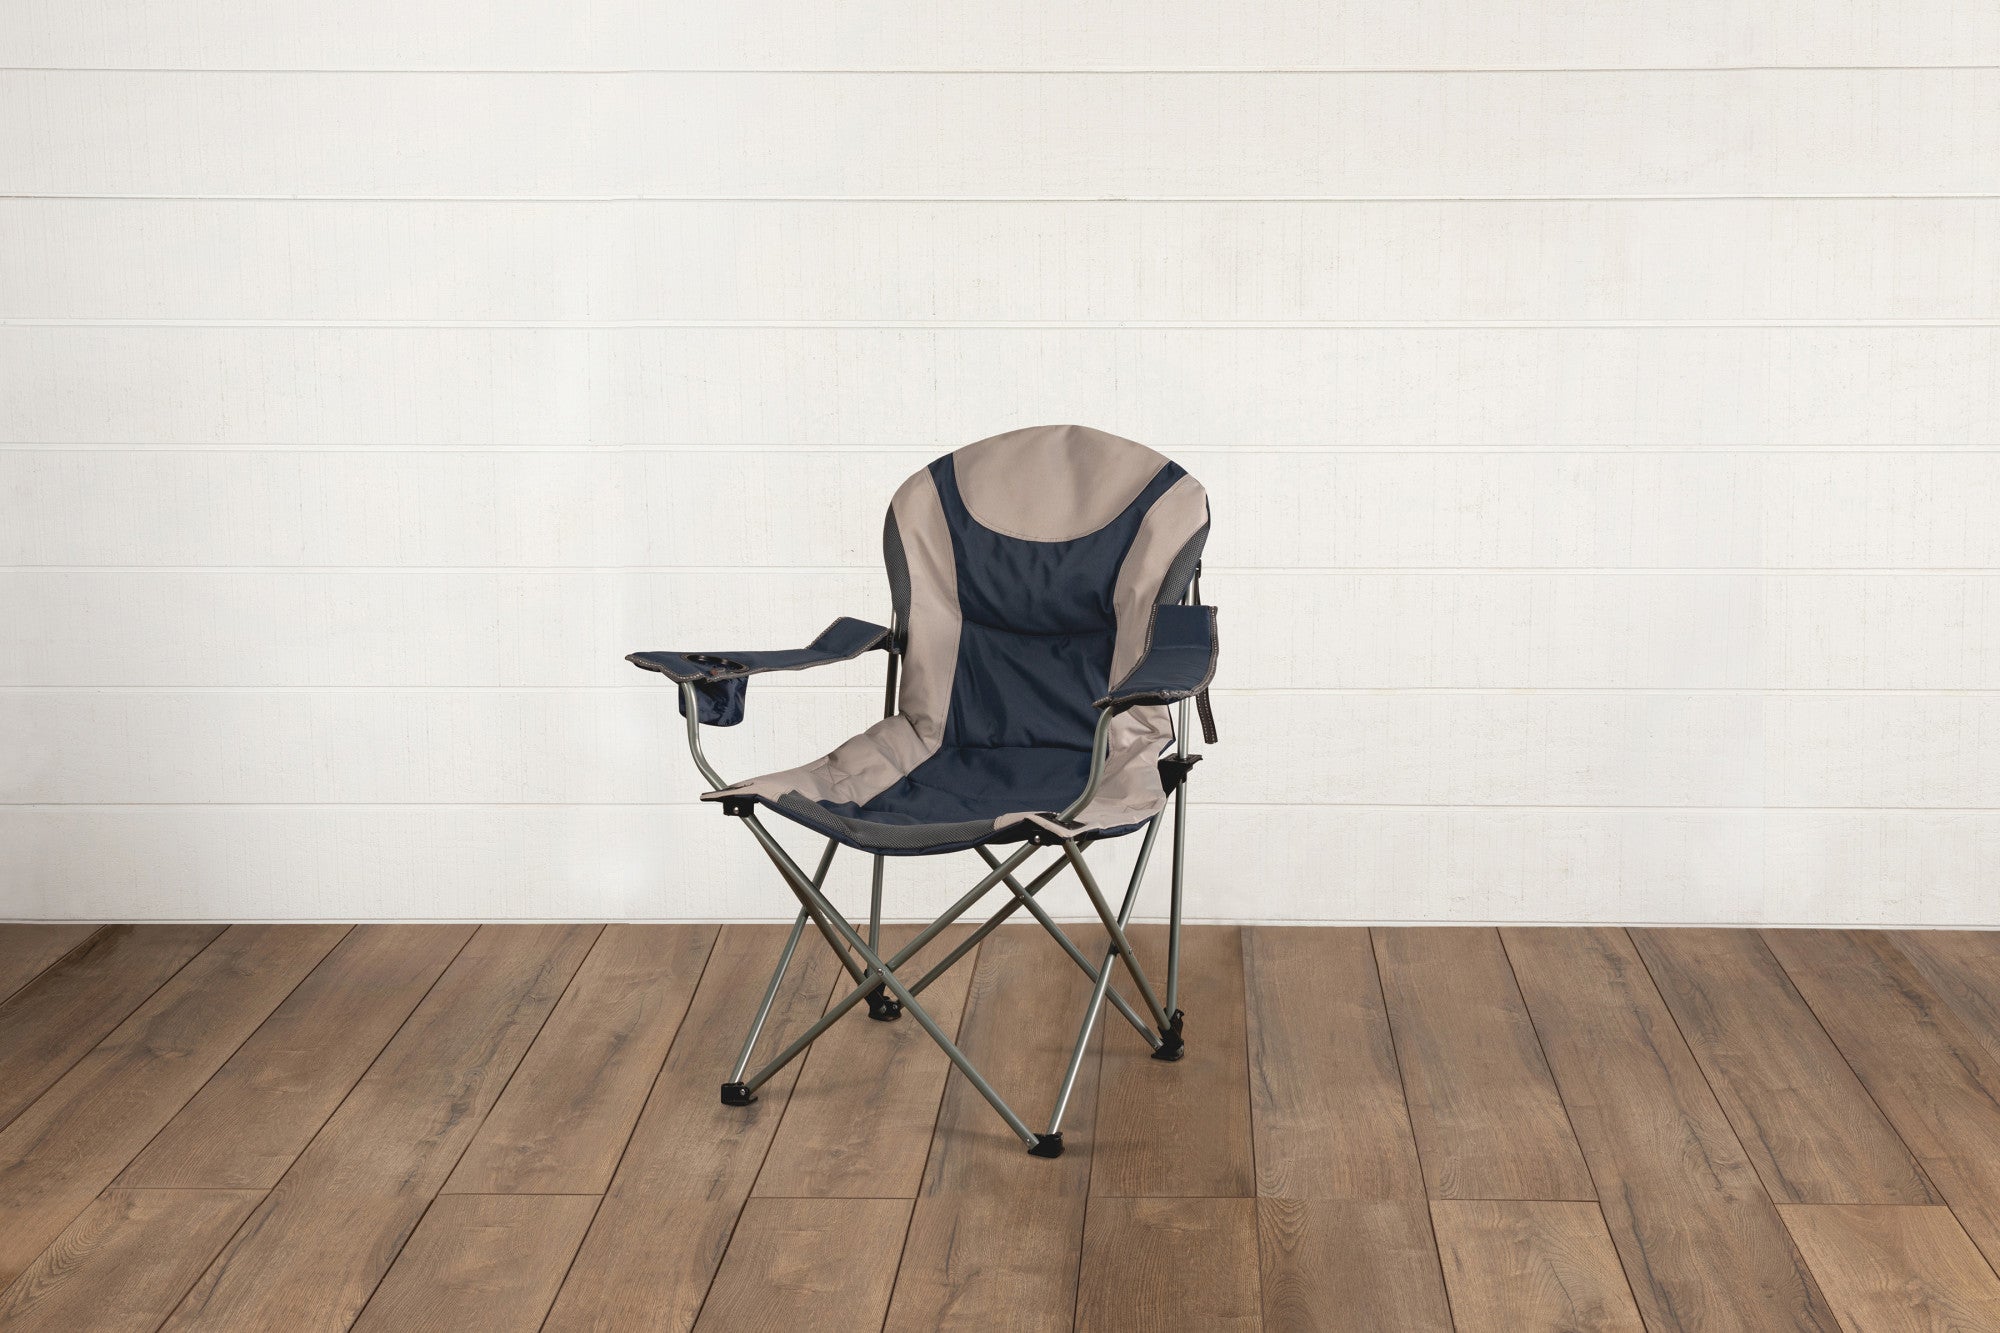 Indianapolis Colts - Reclining Camp Chair